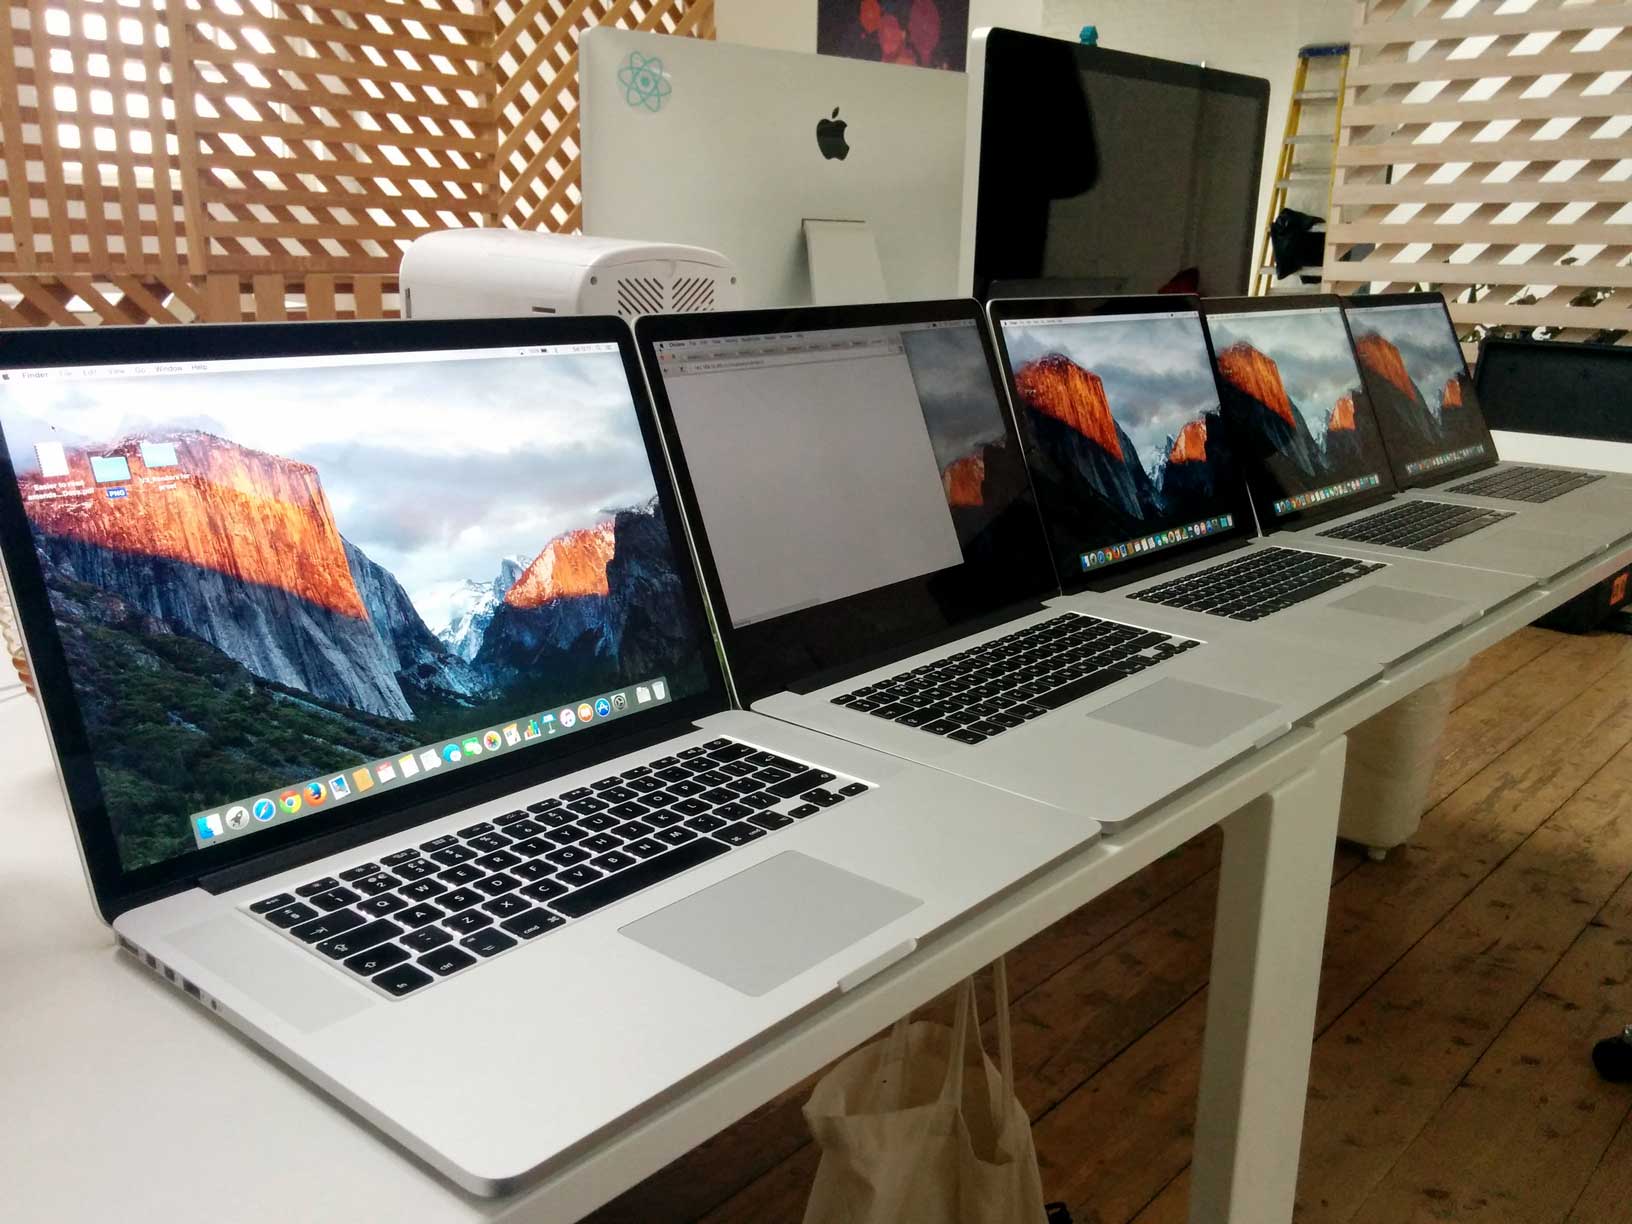 Five identical MacBook Pros lined up in a row on a desk